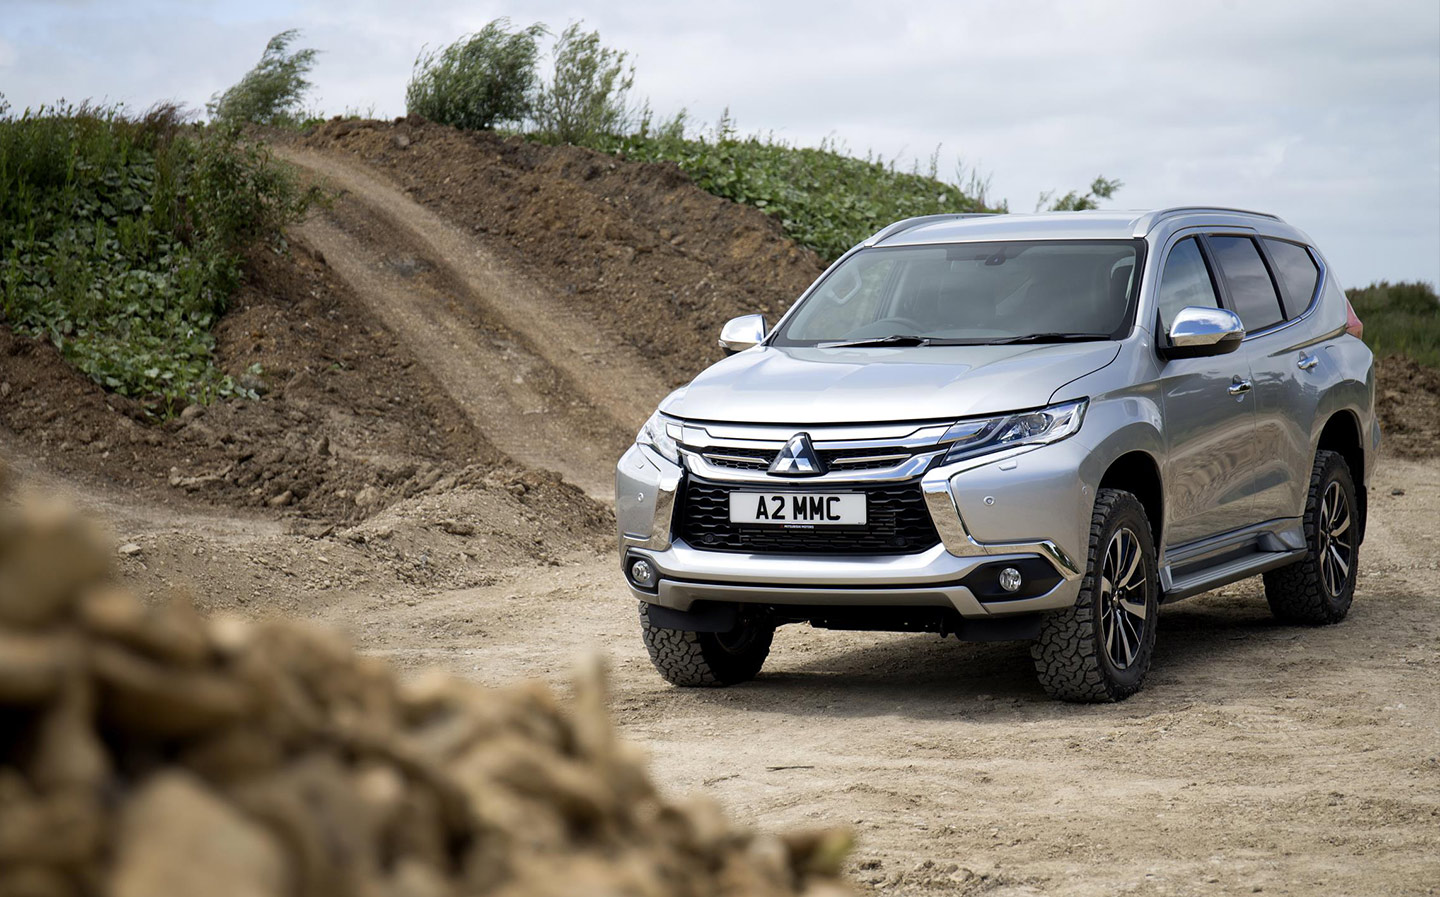 2018 Mitsubishi Shogun Sport review by Rory White for Driving.co.uk